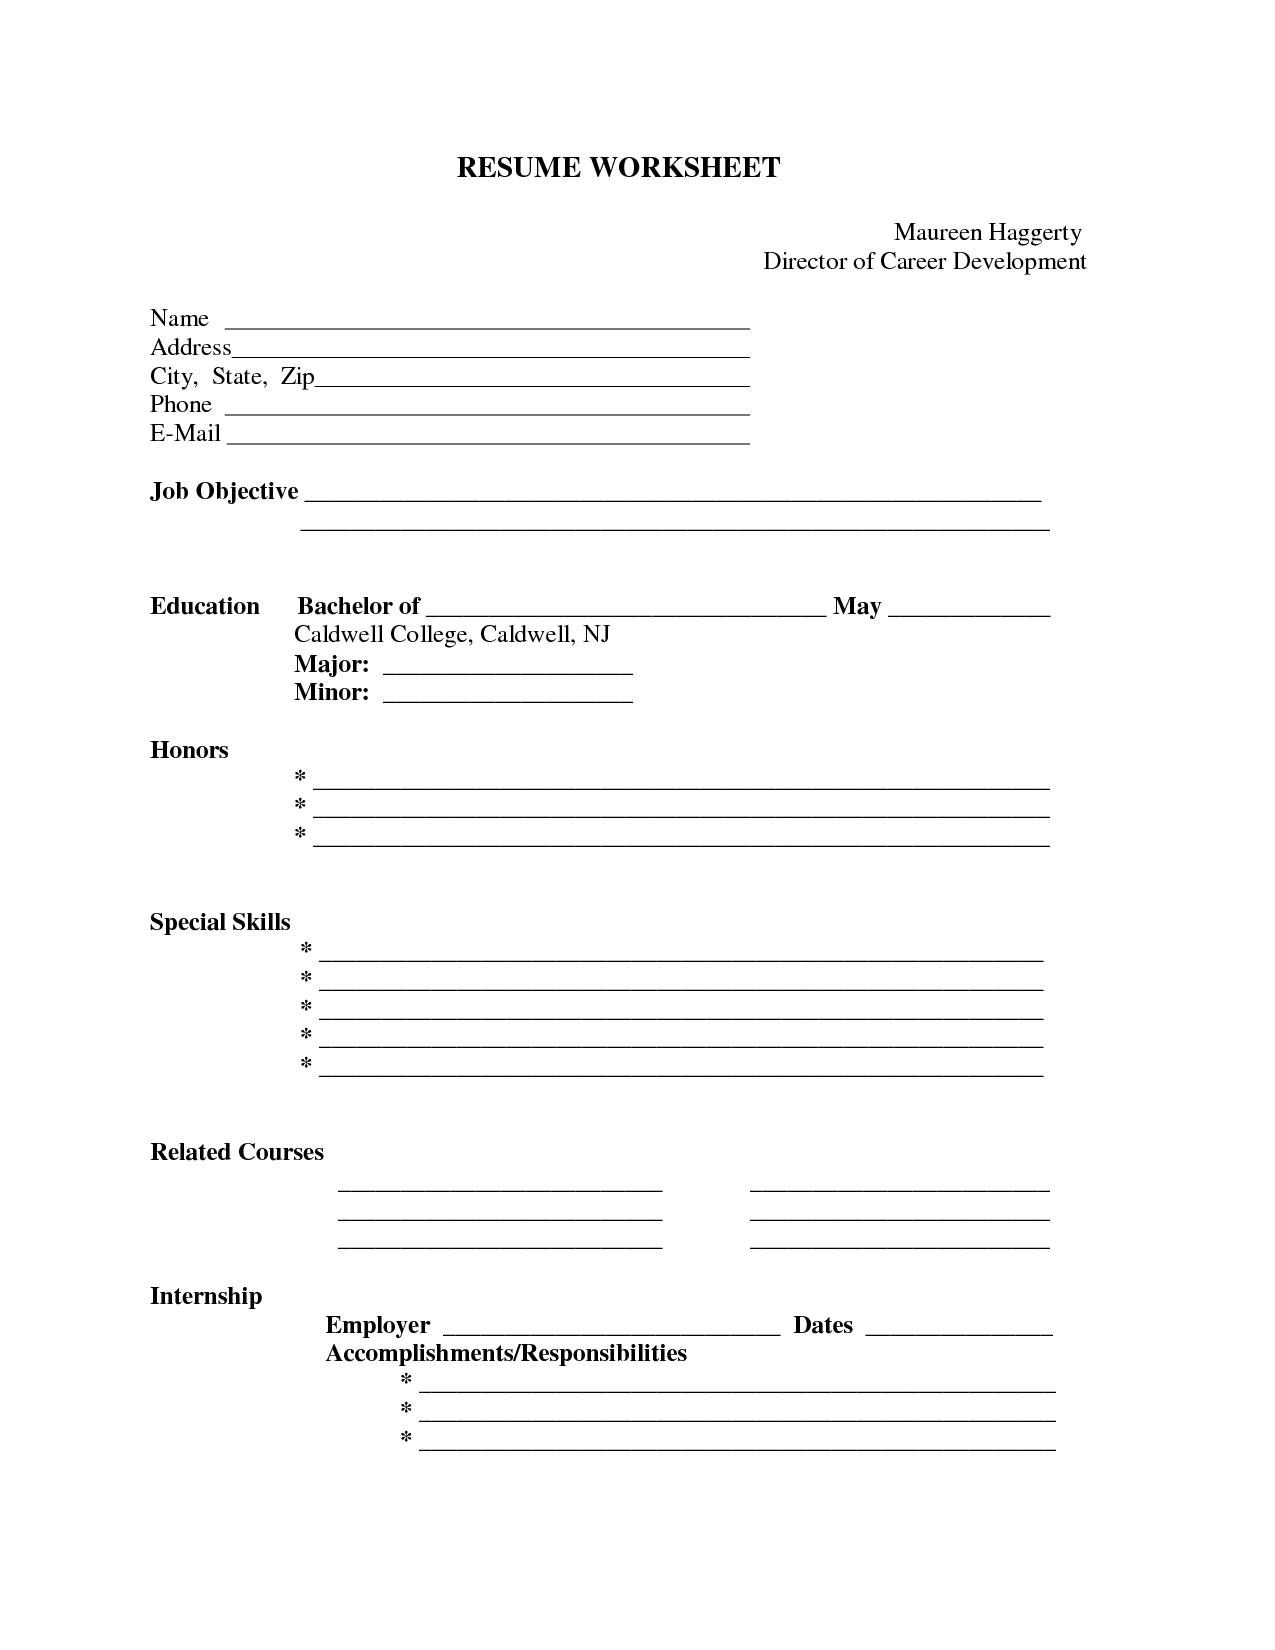 Free Fill In The Blank Resume Template Enom inside measurements 1275 X 1650